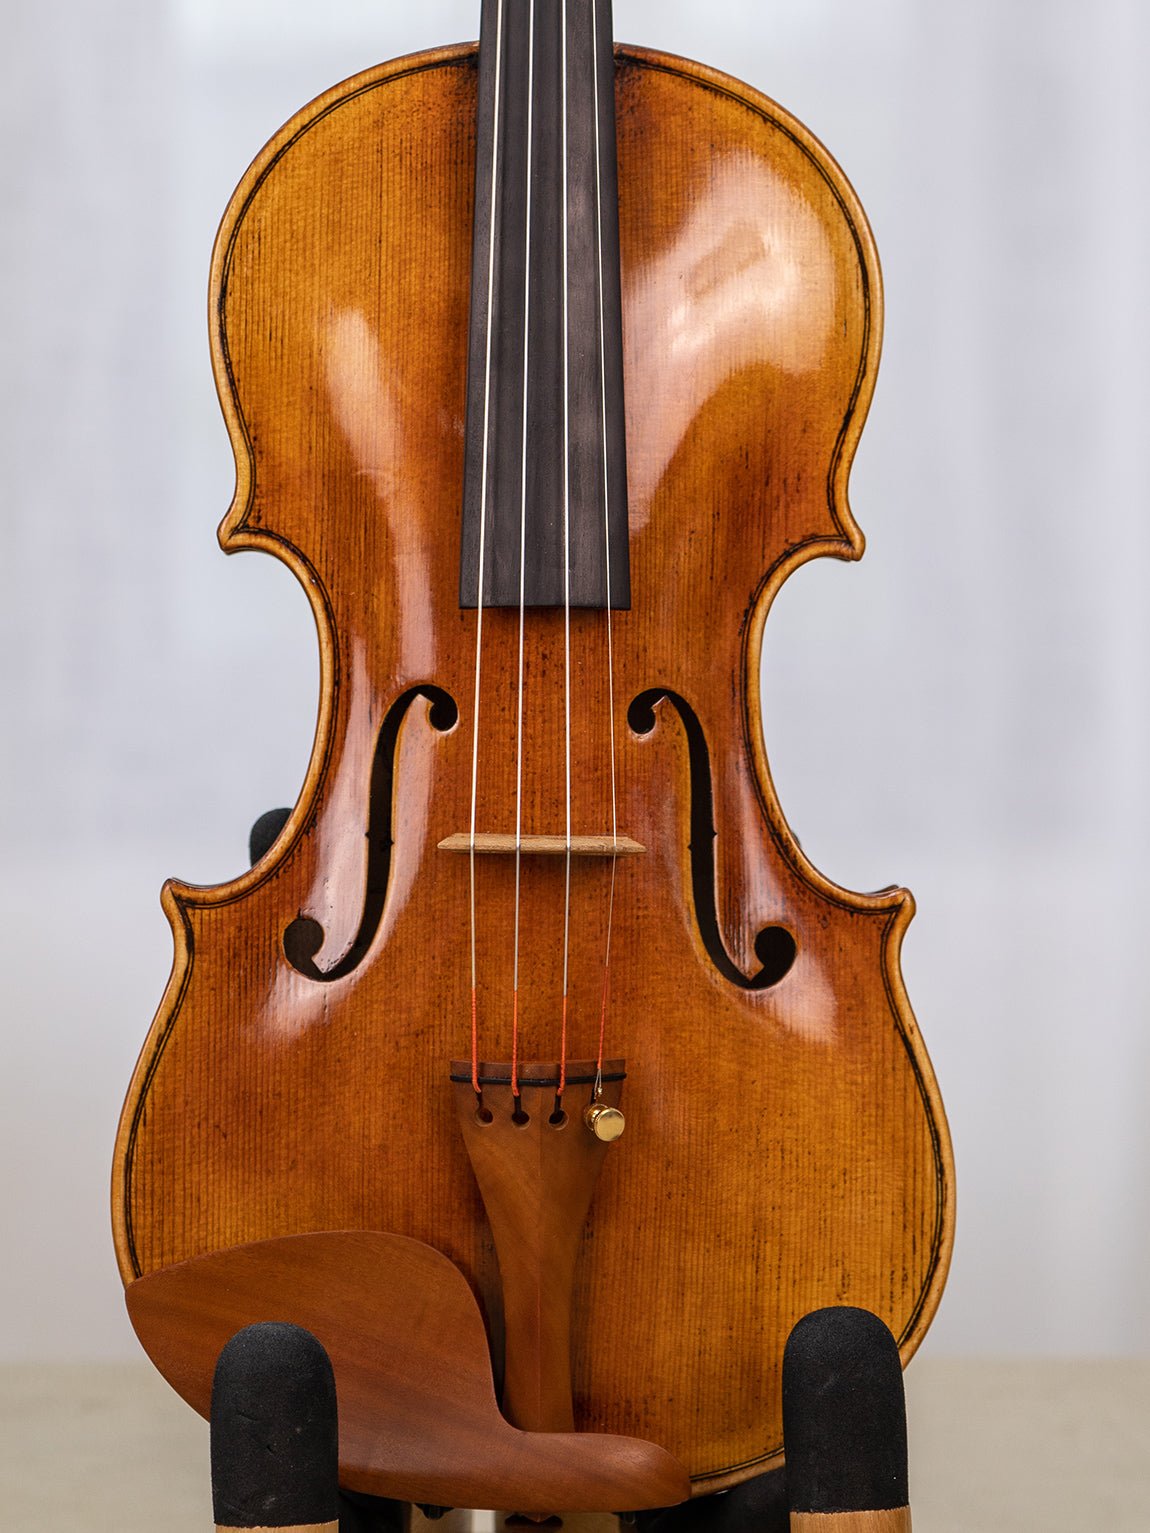 A&H Amati 1603   4/4 Violin. IUEStrings Antique-Style